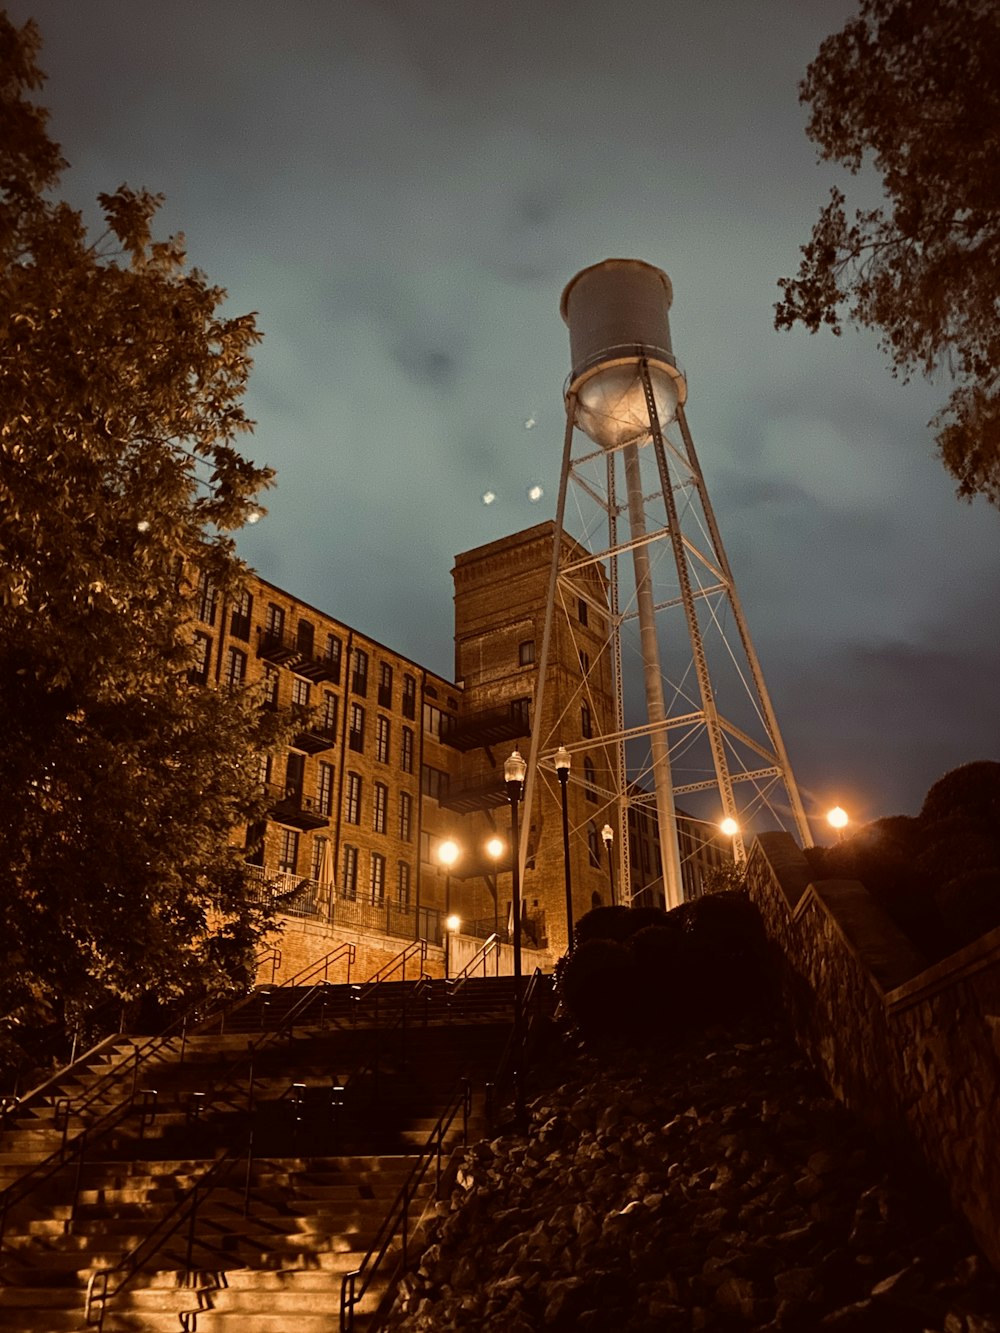 brown concrete building near water tank during night time